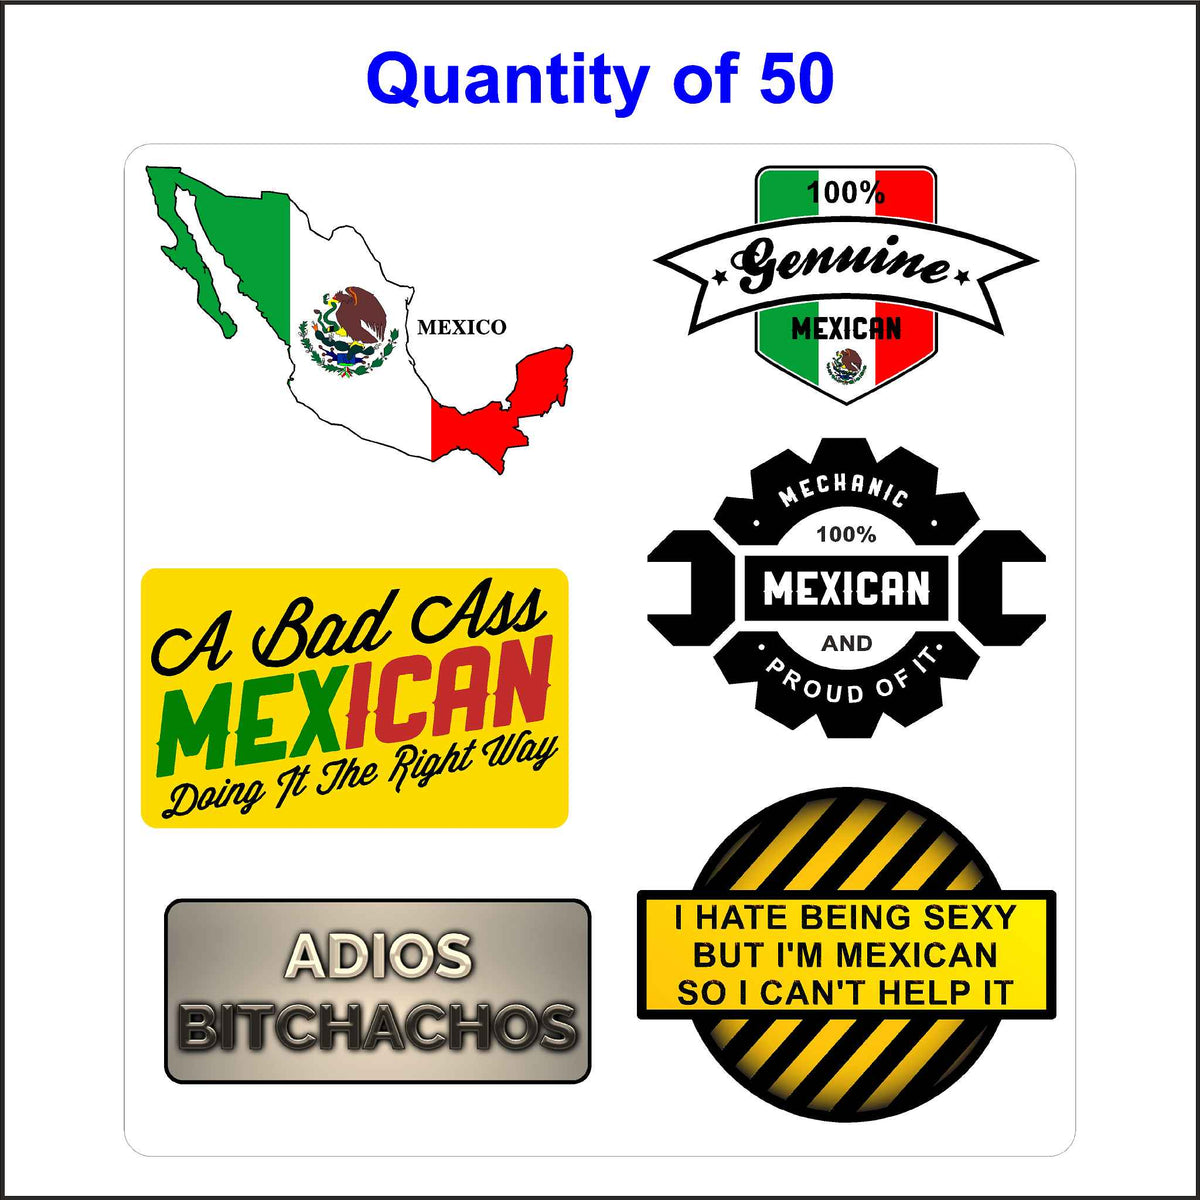 Funny Mexican Hard Hat Stickers, Bad Ass Mexican, Adios Bitchachos. 50 Quantity.